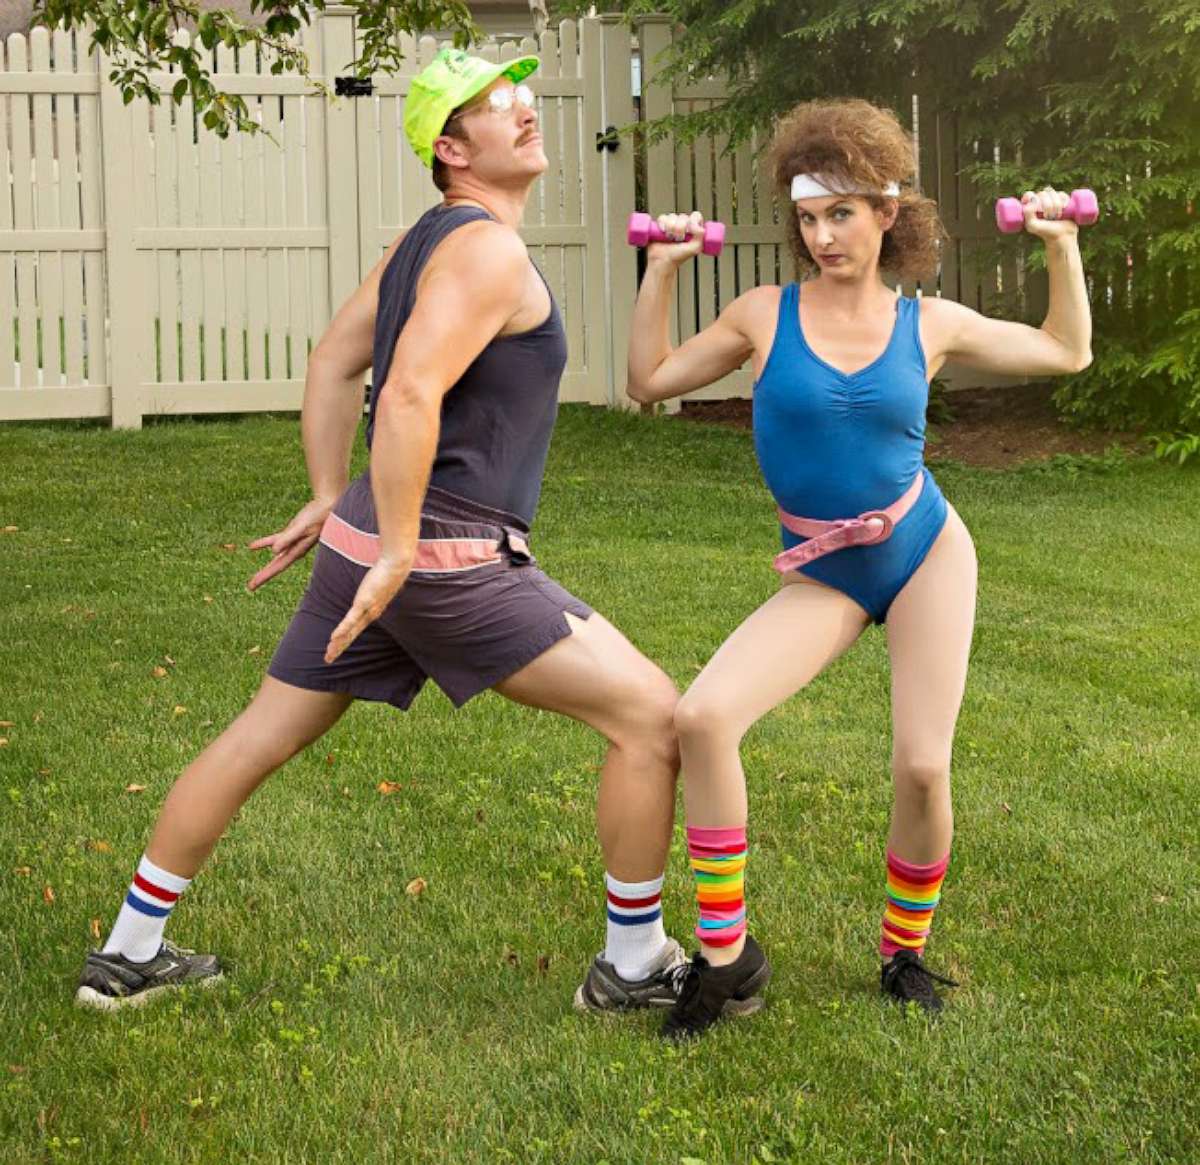 PHOTO: Steve and Danielle VanHorn of Dover, Ohio, celebrated their 10th anniversary in style with a snazzy 1980s photo shoot. 